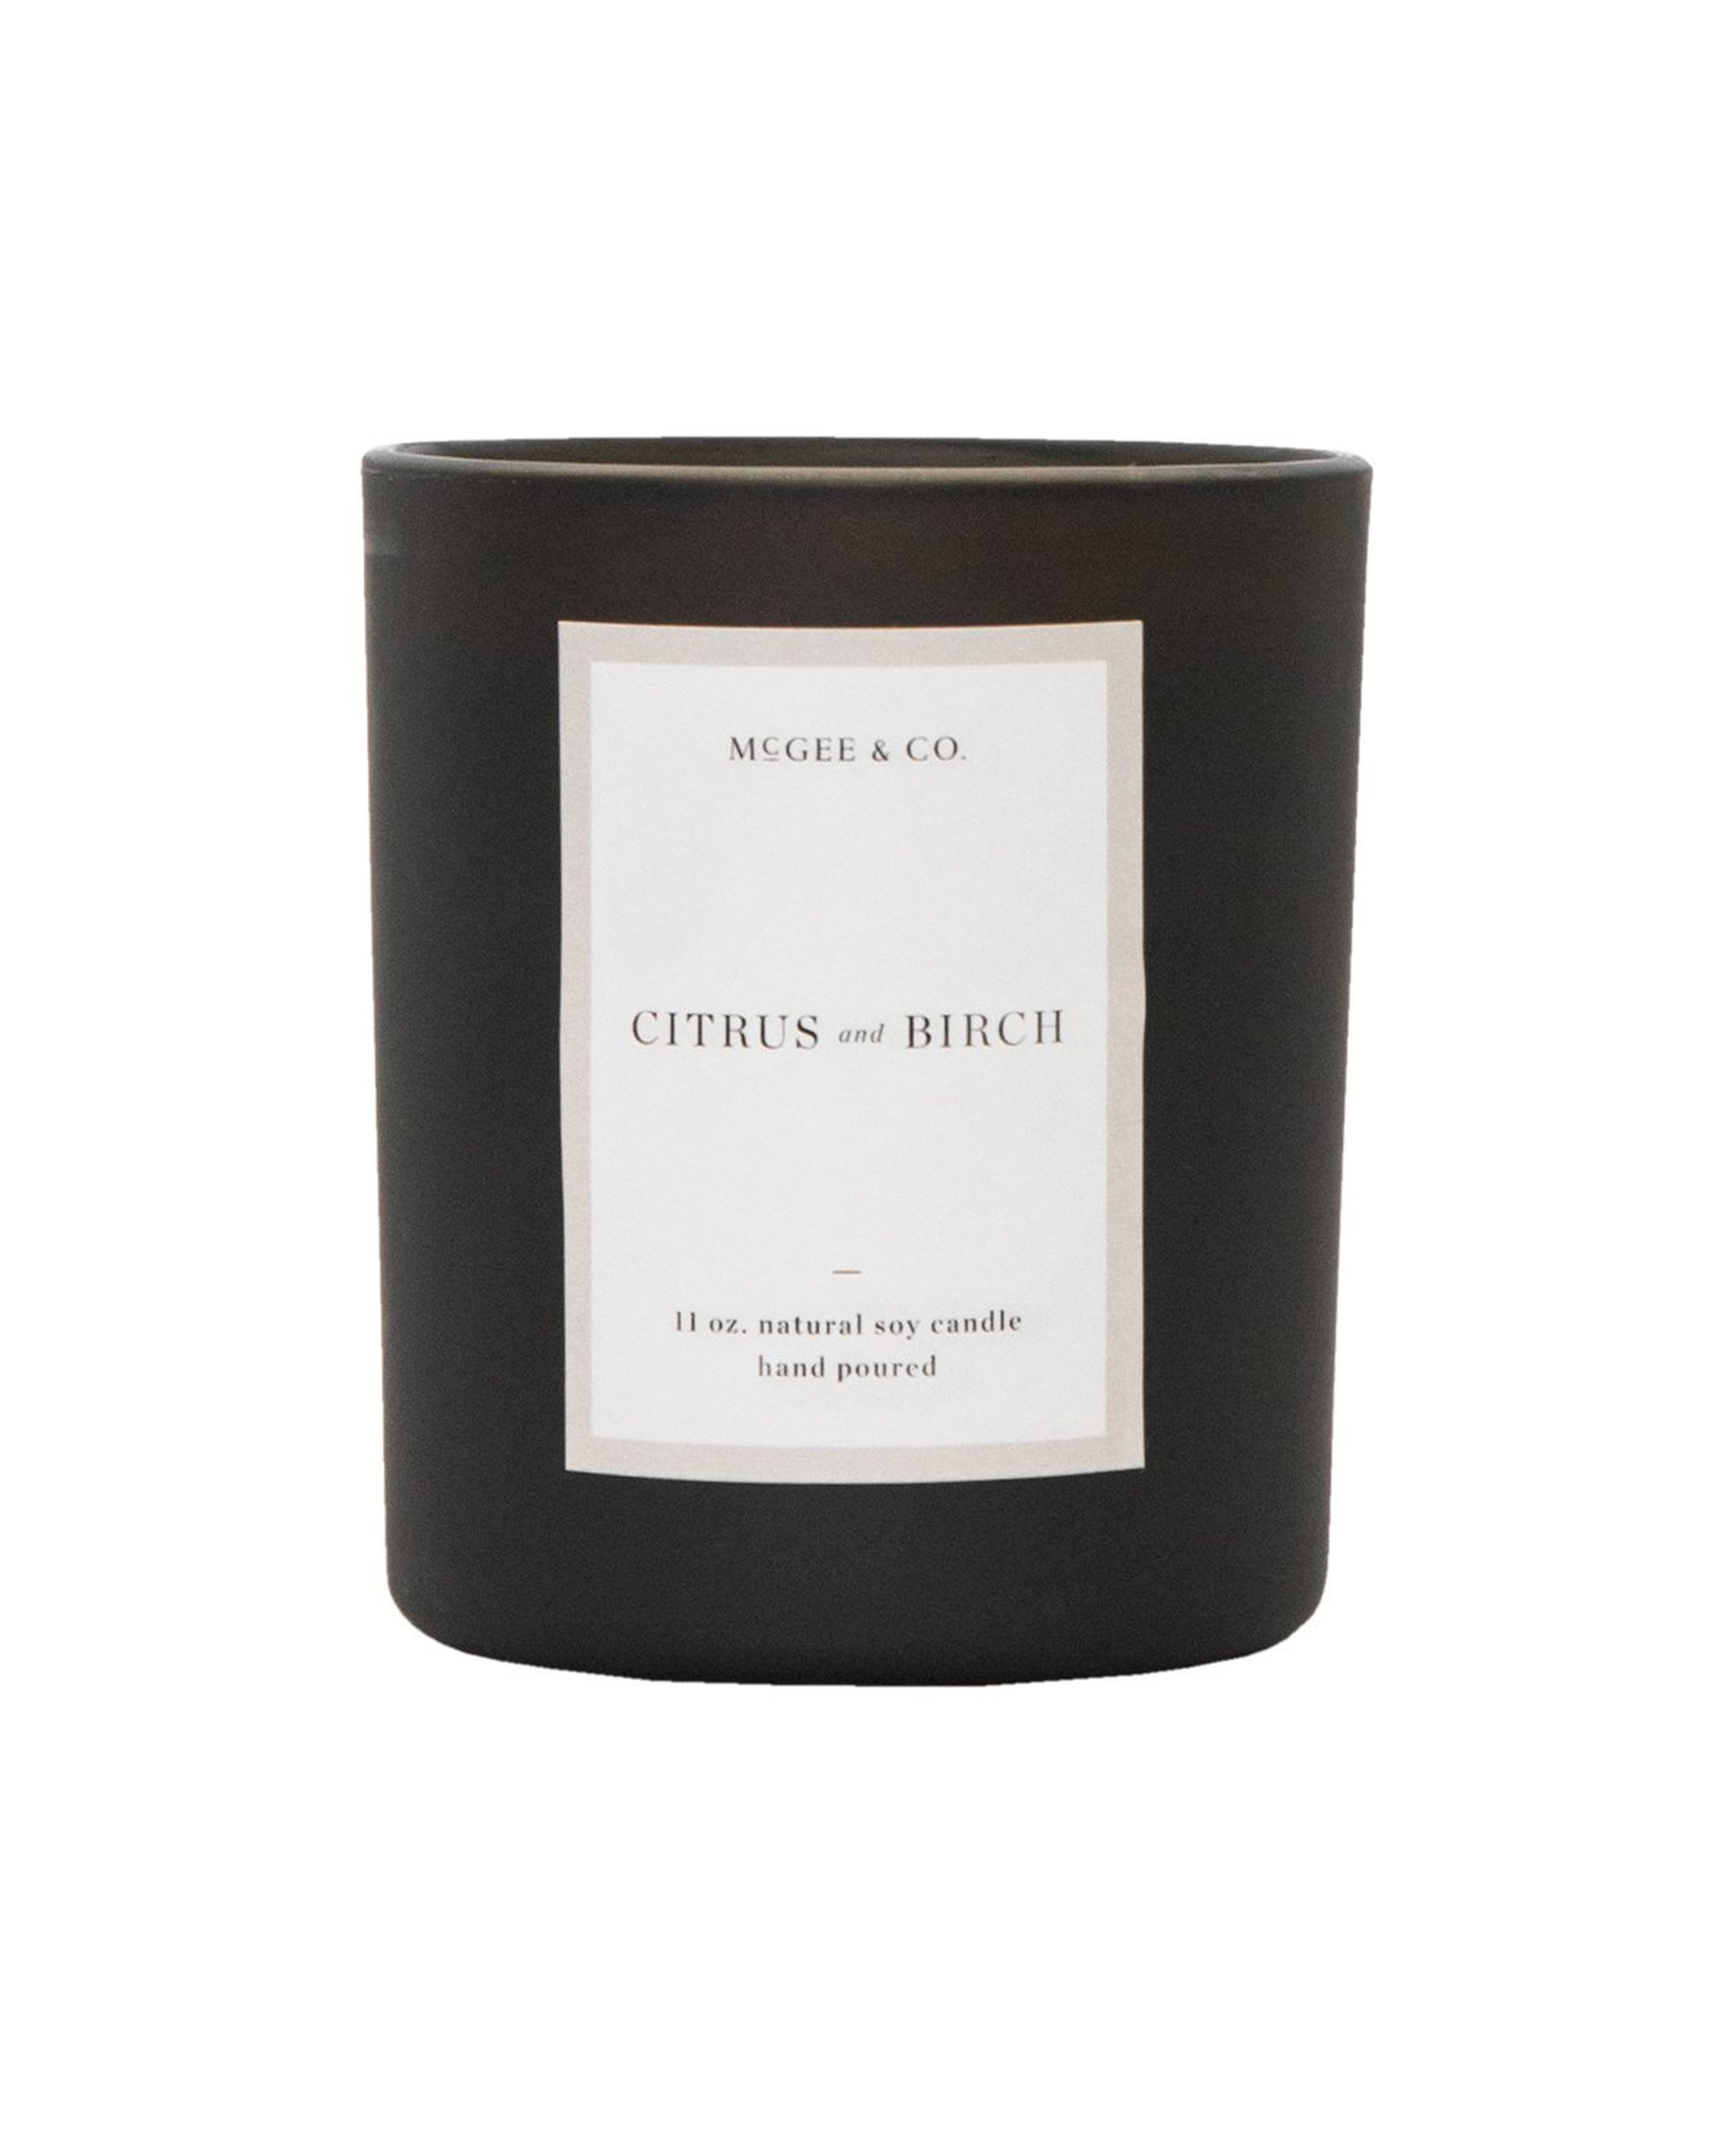 Citrus & Birch Candle - McGee & Co.